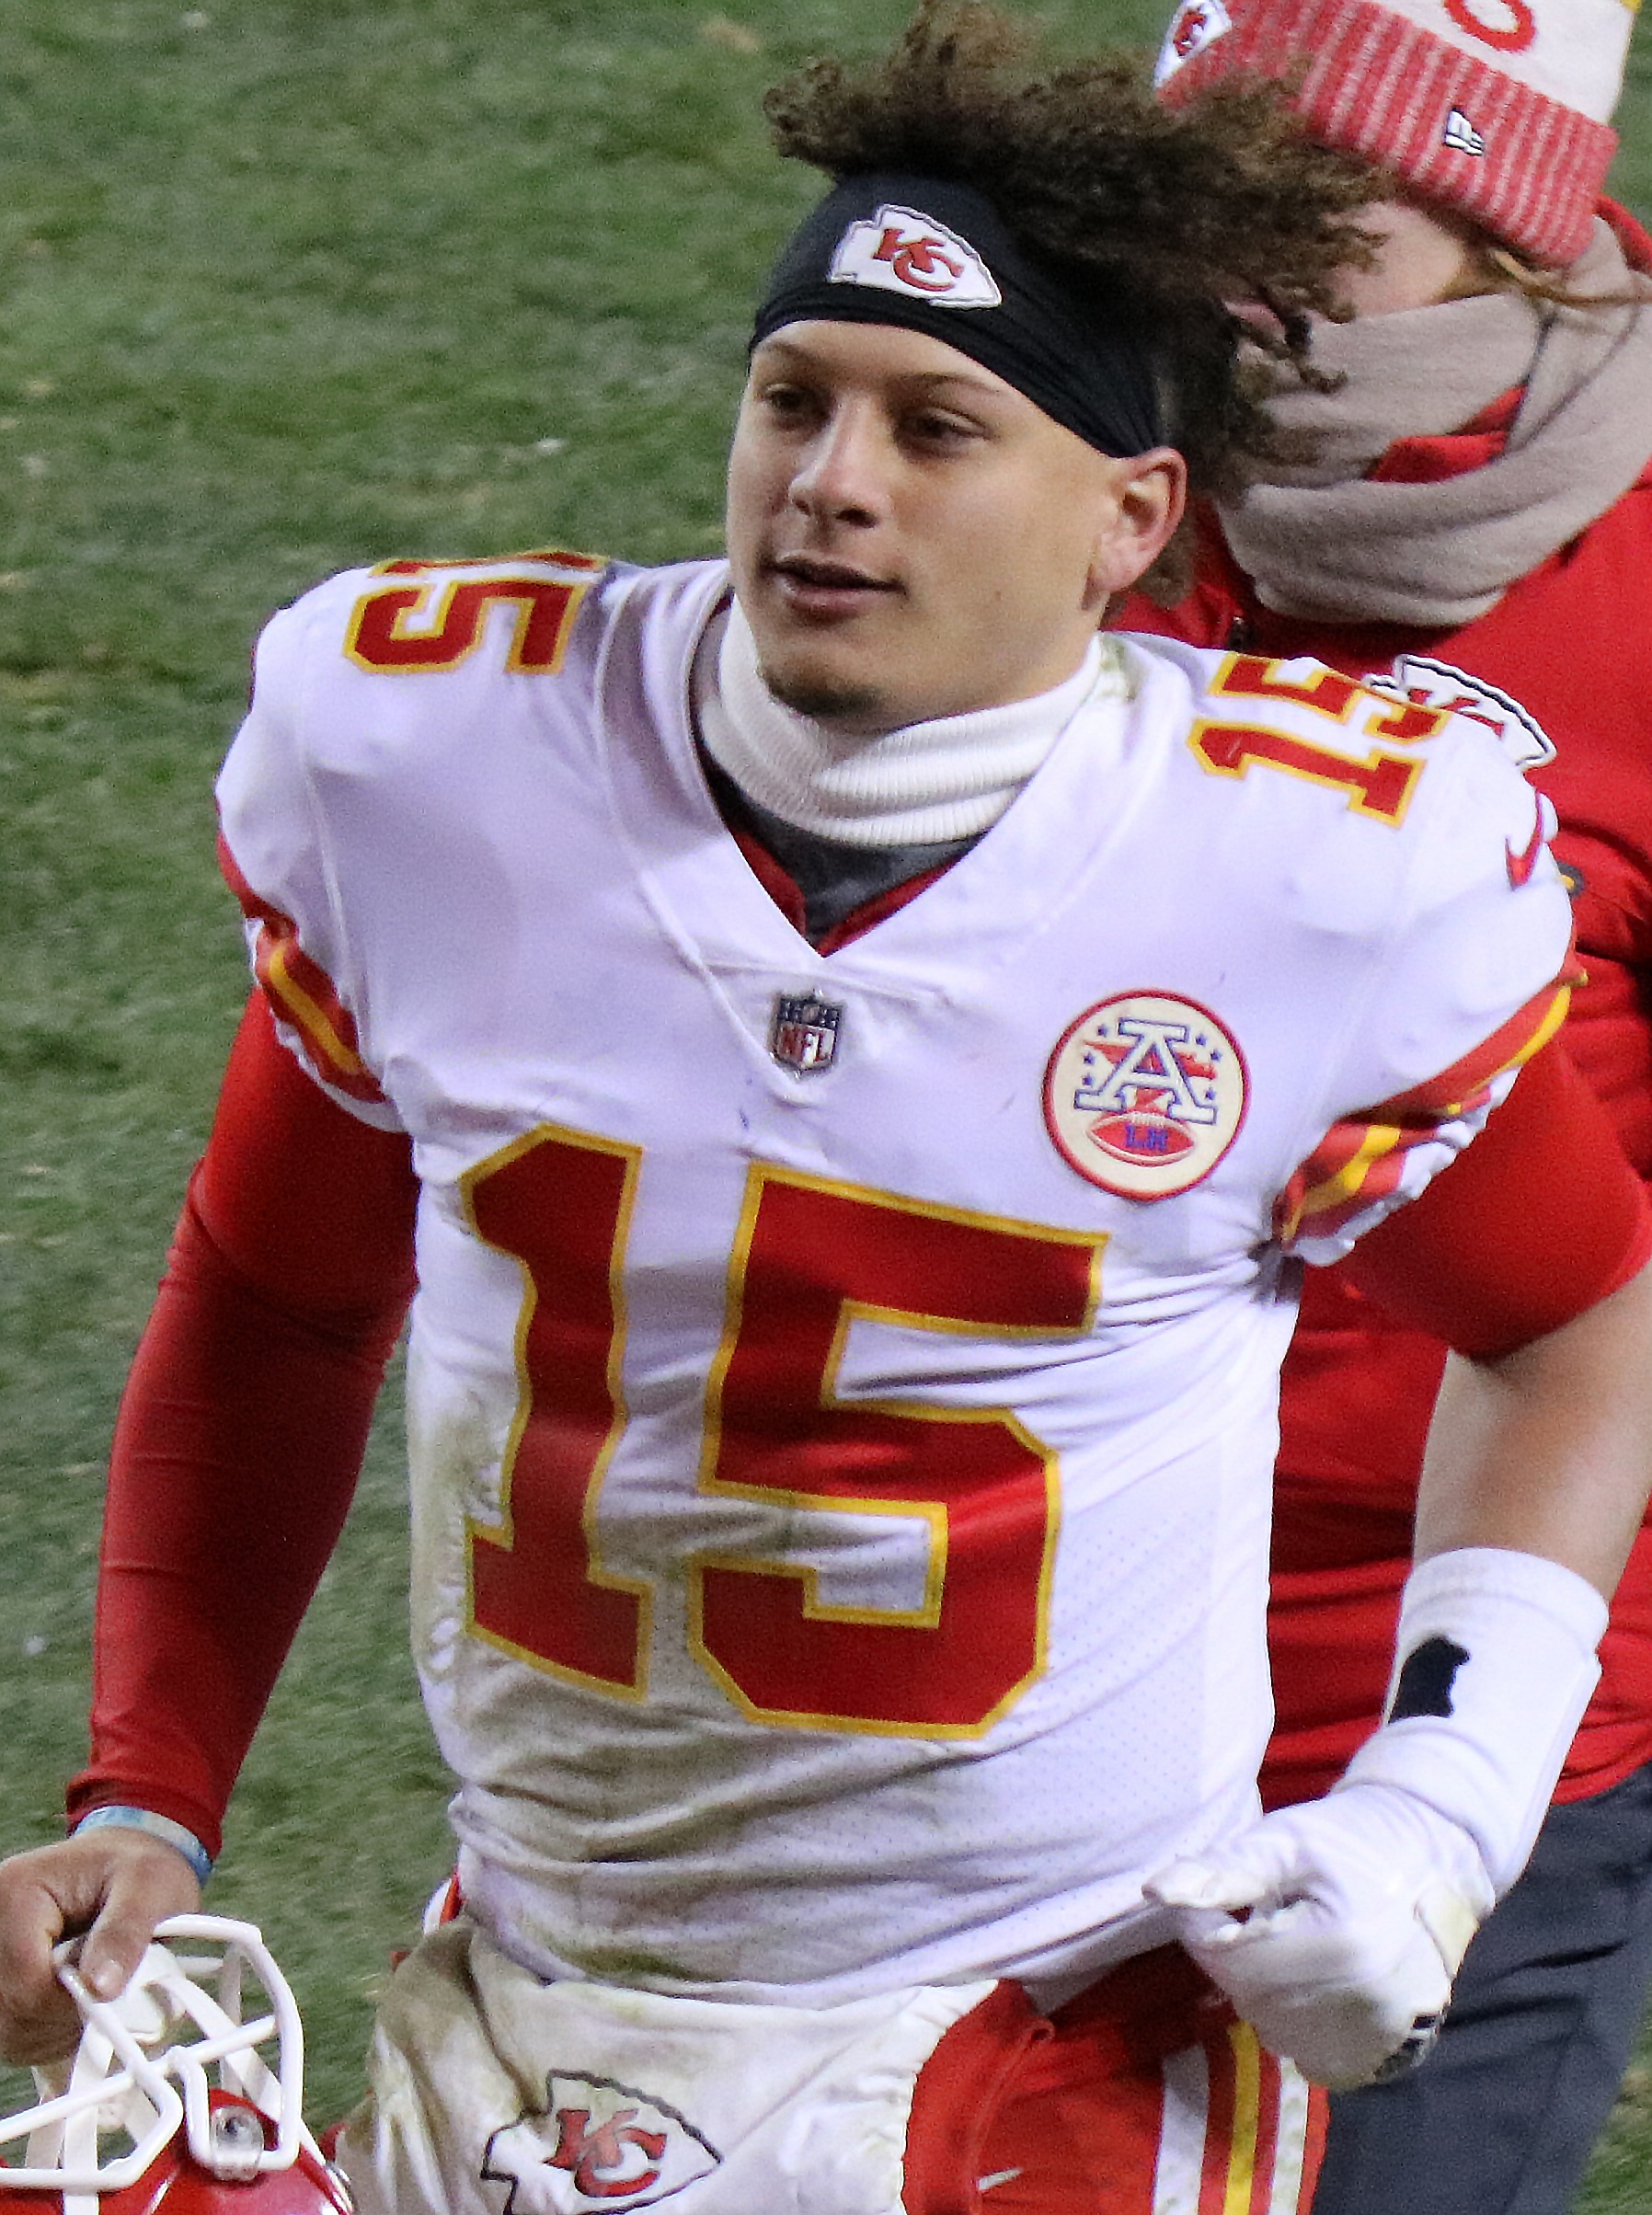 Patrick Mahomes looks young as he jogs off the field in his white Kansas City Chiefs uniform. His hair sticks up in a shock atop a headband.